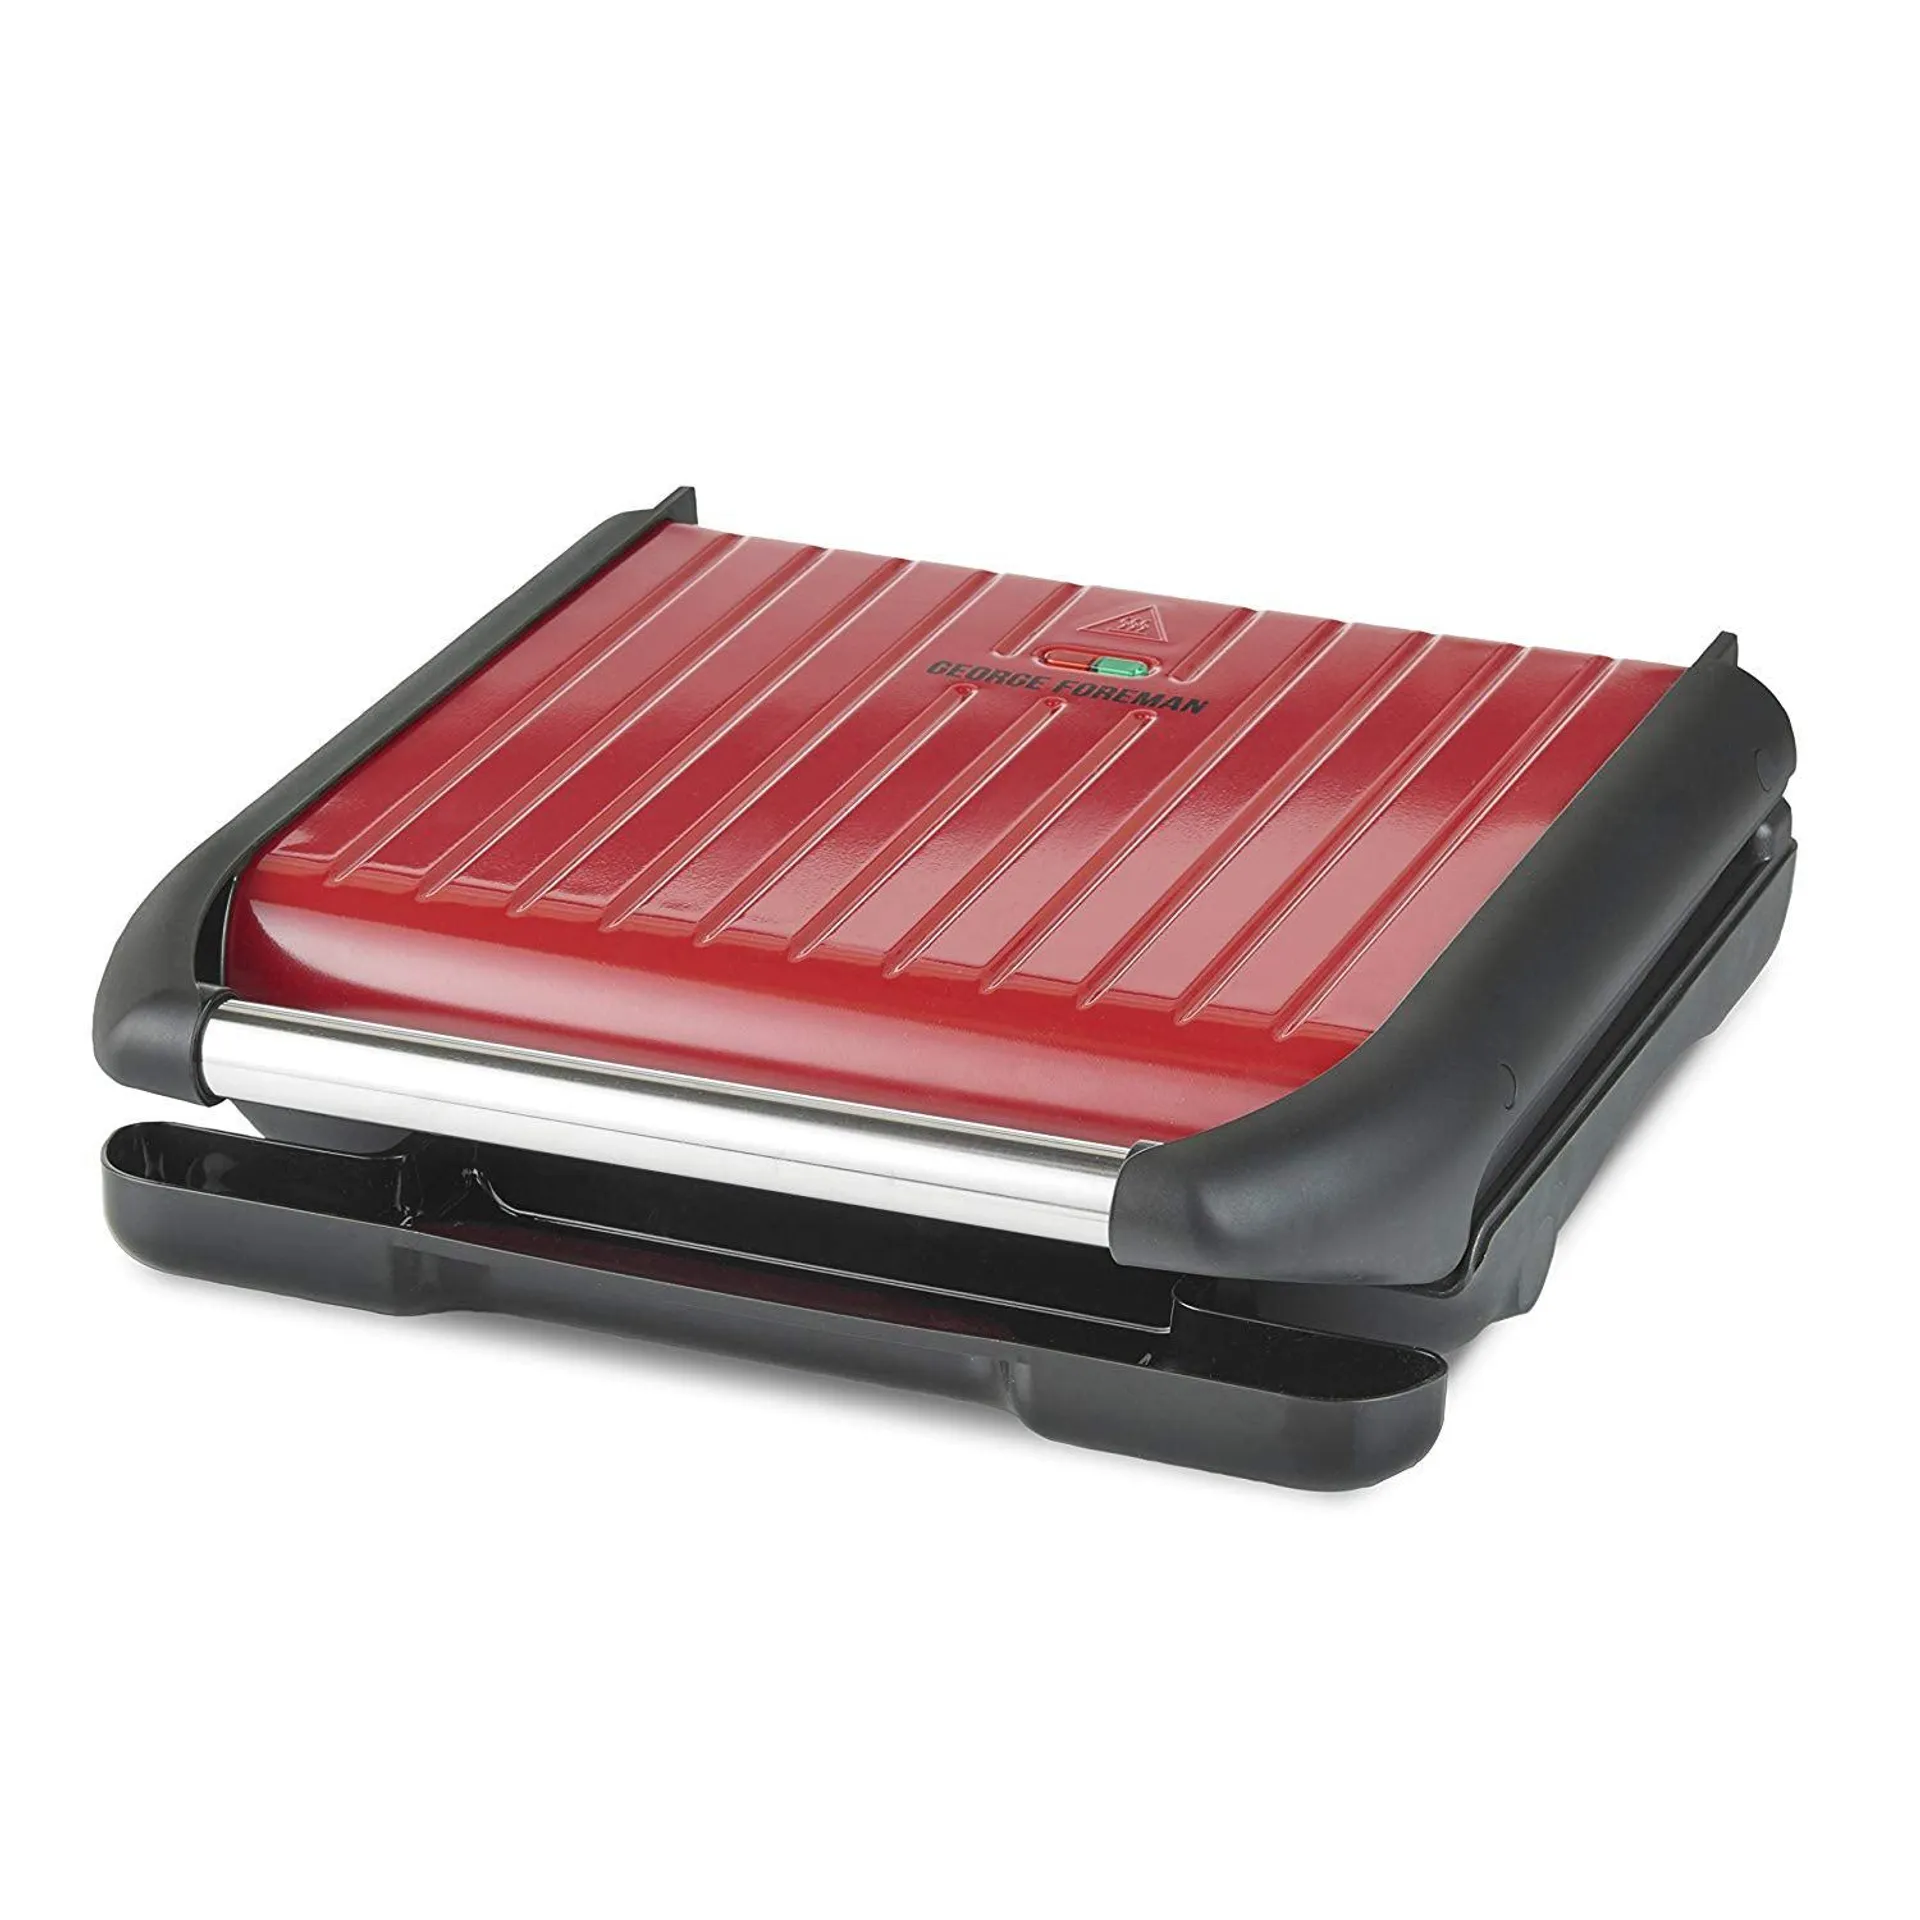 George Foreman Entertaining Grill - Red